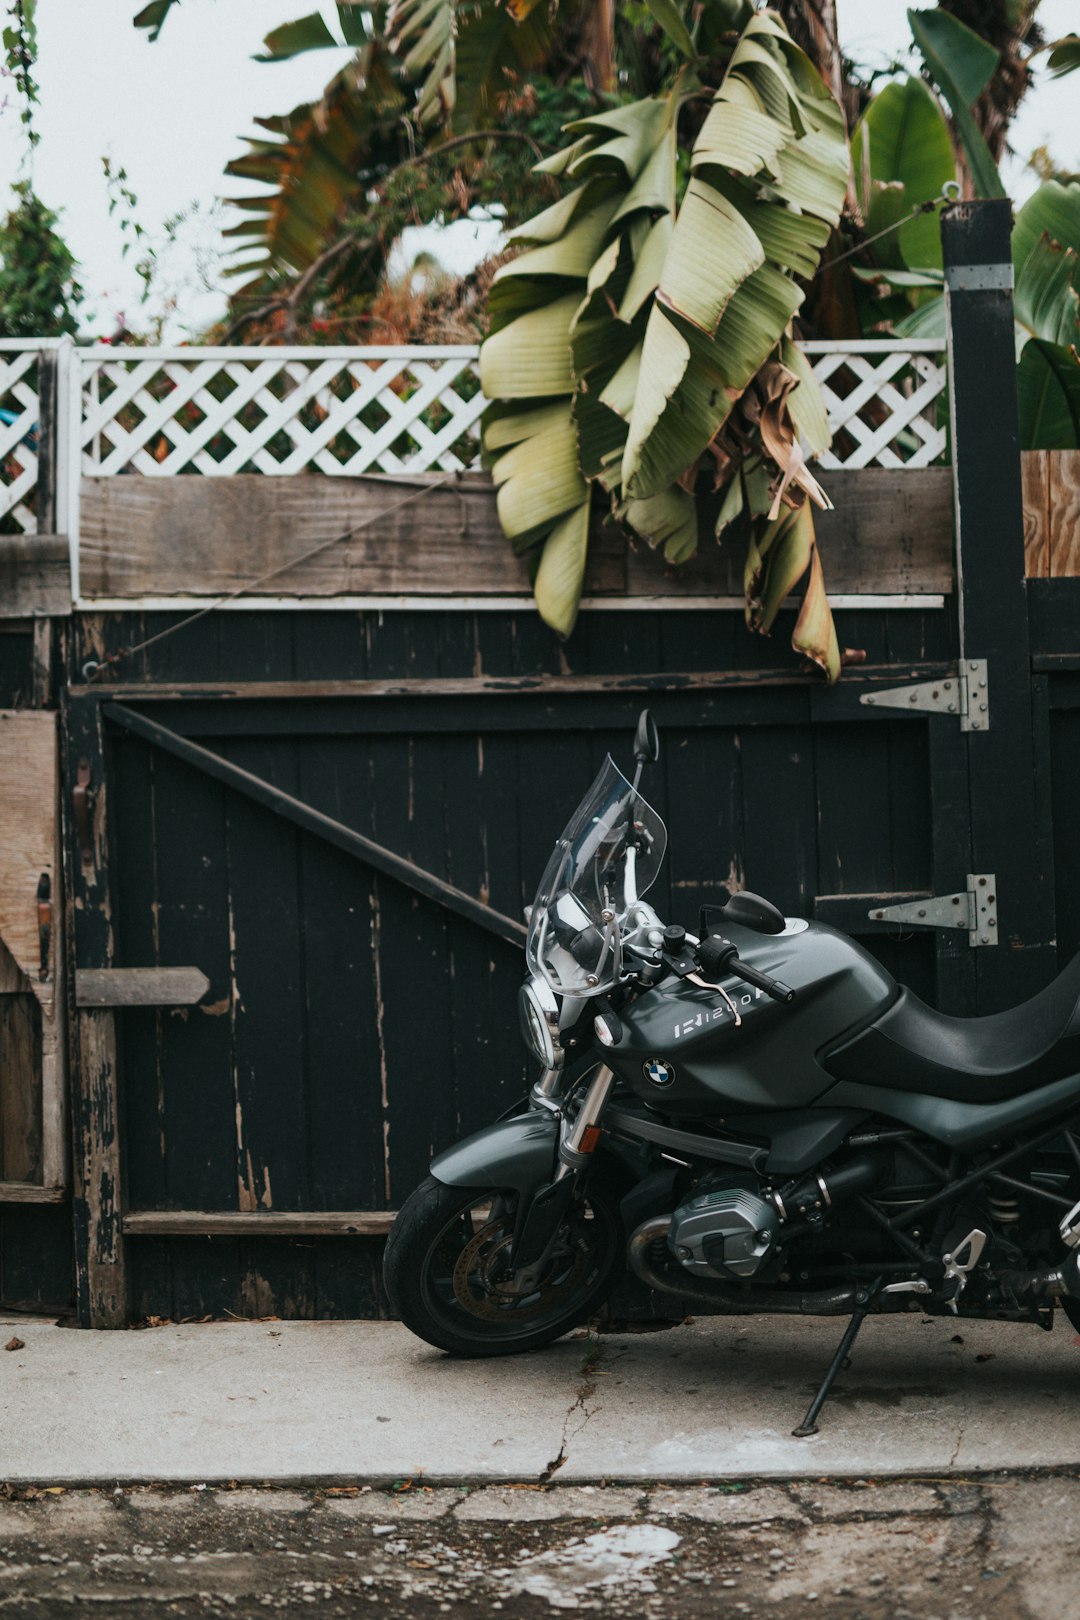 parked motorcycle beside wooden fence